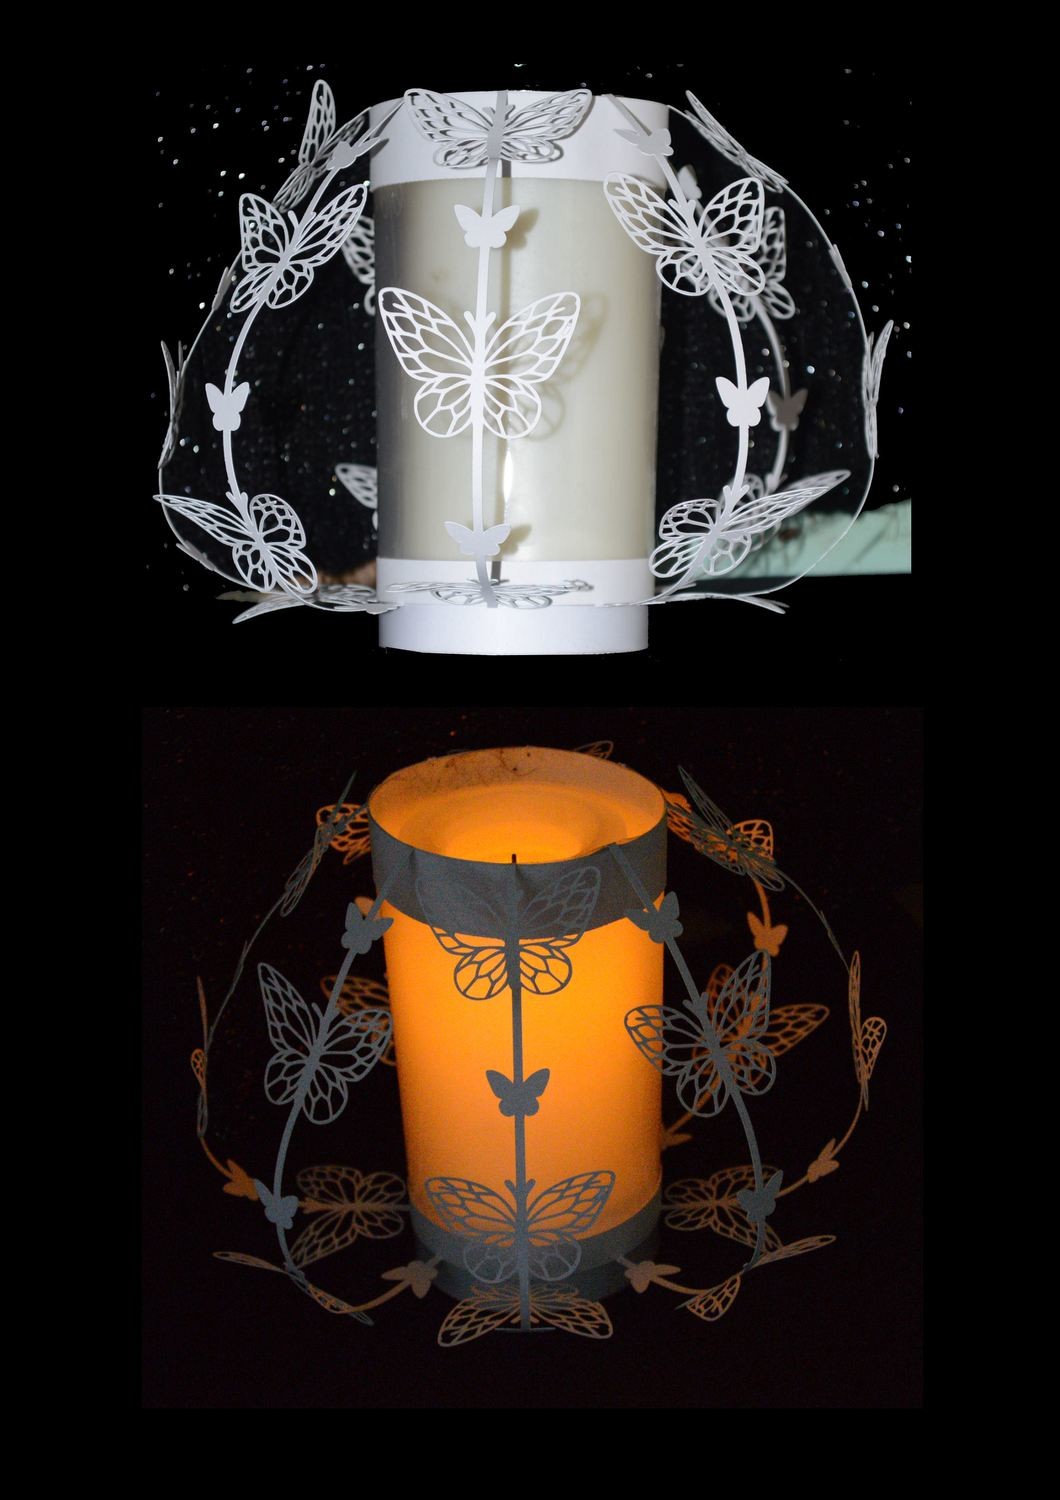 Laced Butterfly Luminaire Great table centrepiece for Weddings and Parties.